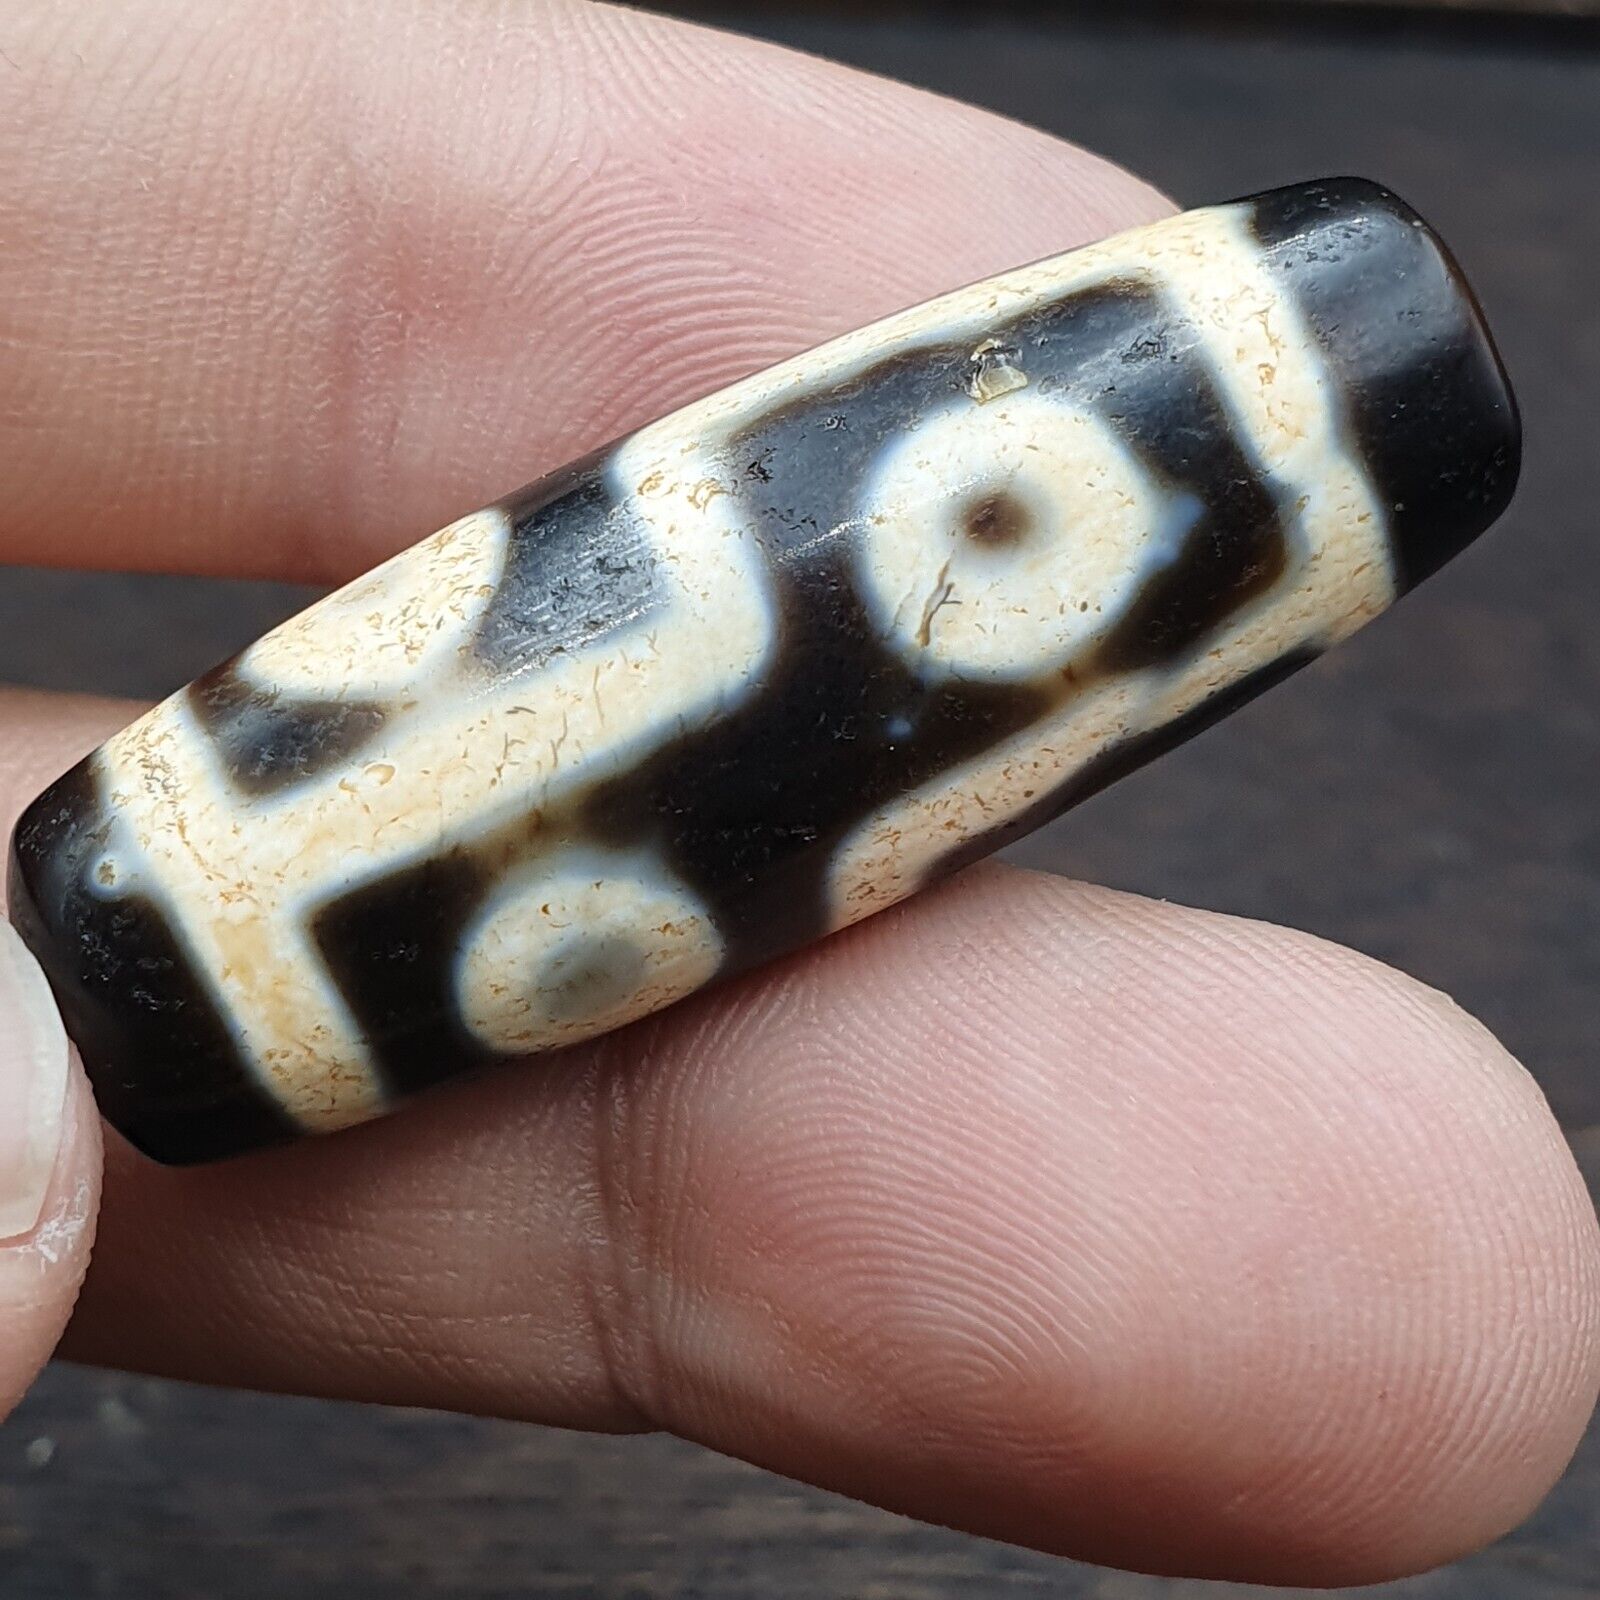 Rare Tibetan Dzi Bead: Ancient Agate Amulet with 6 Eyes – A Treasured Antique from Tibet